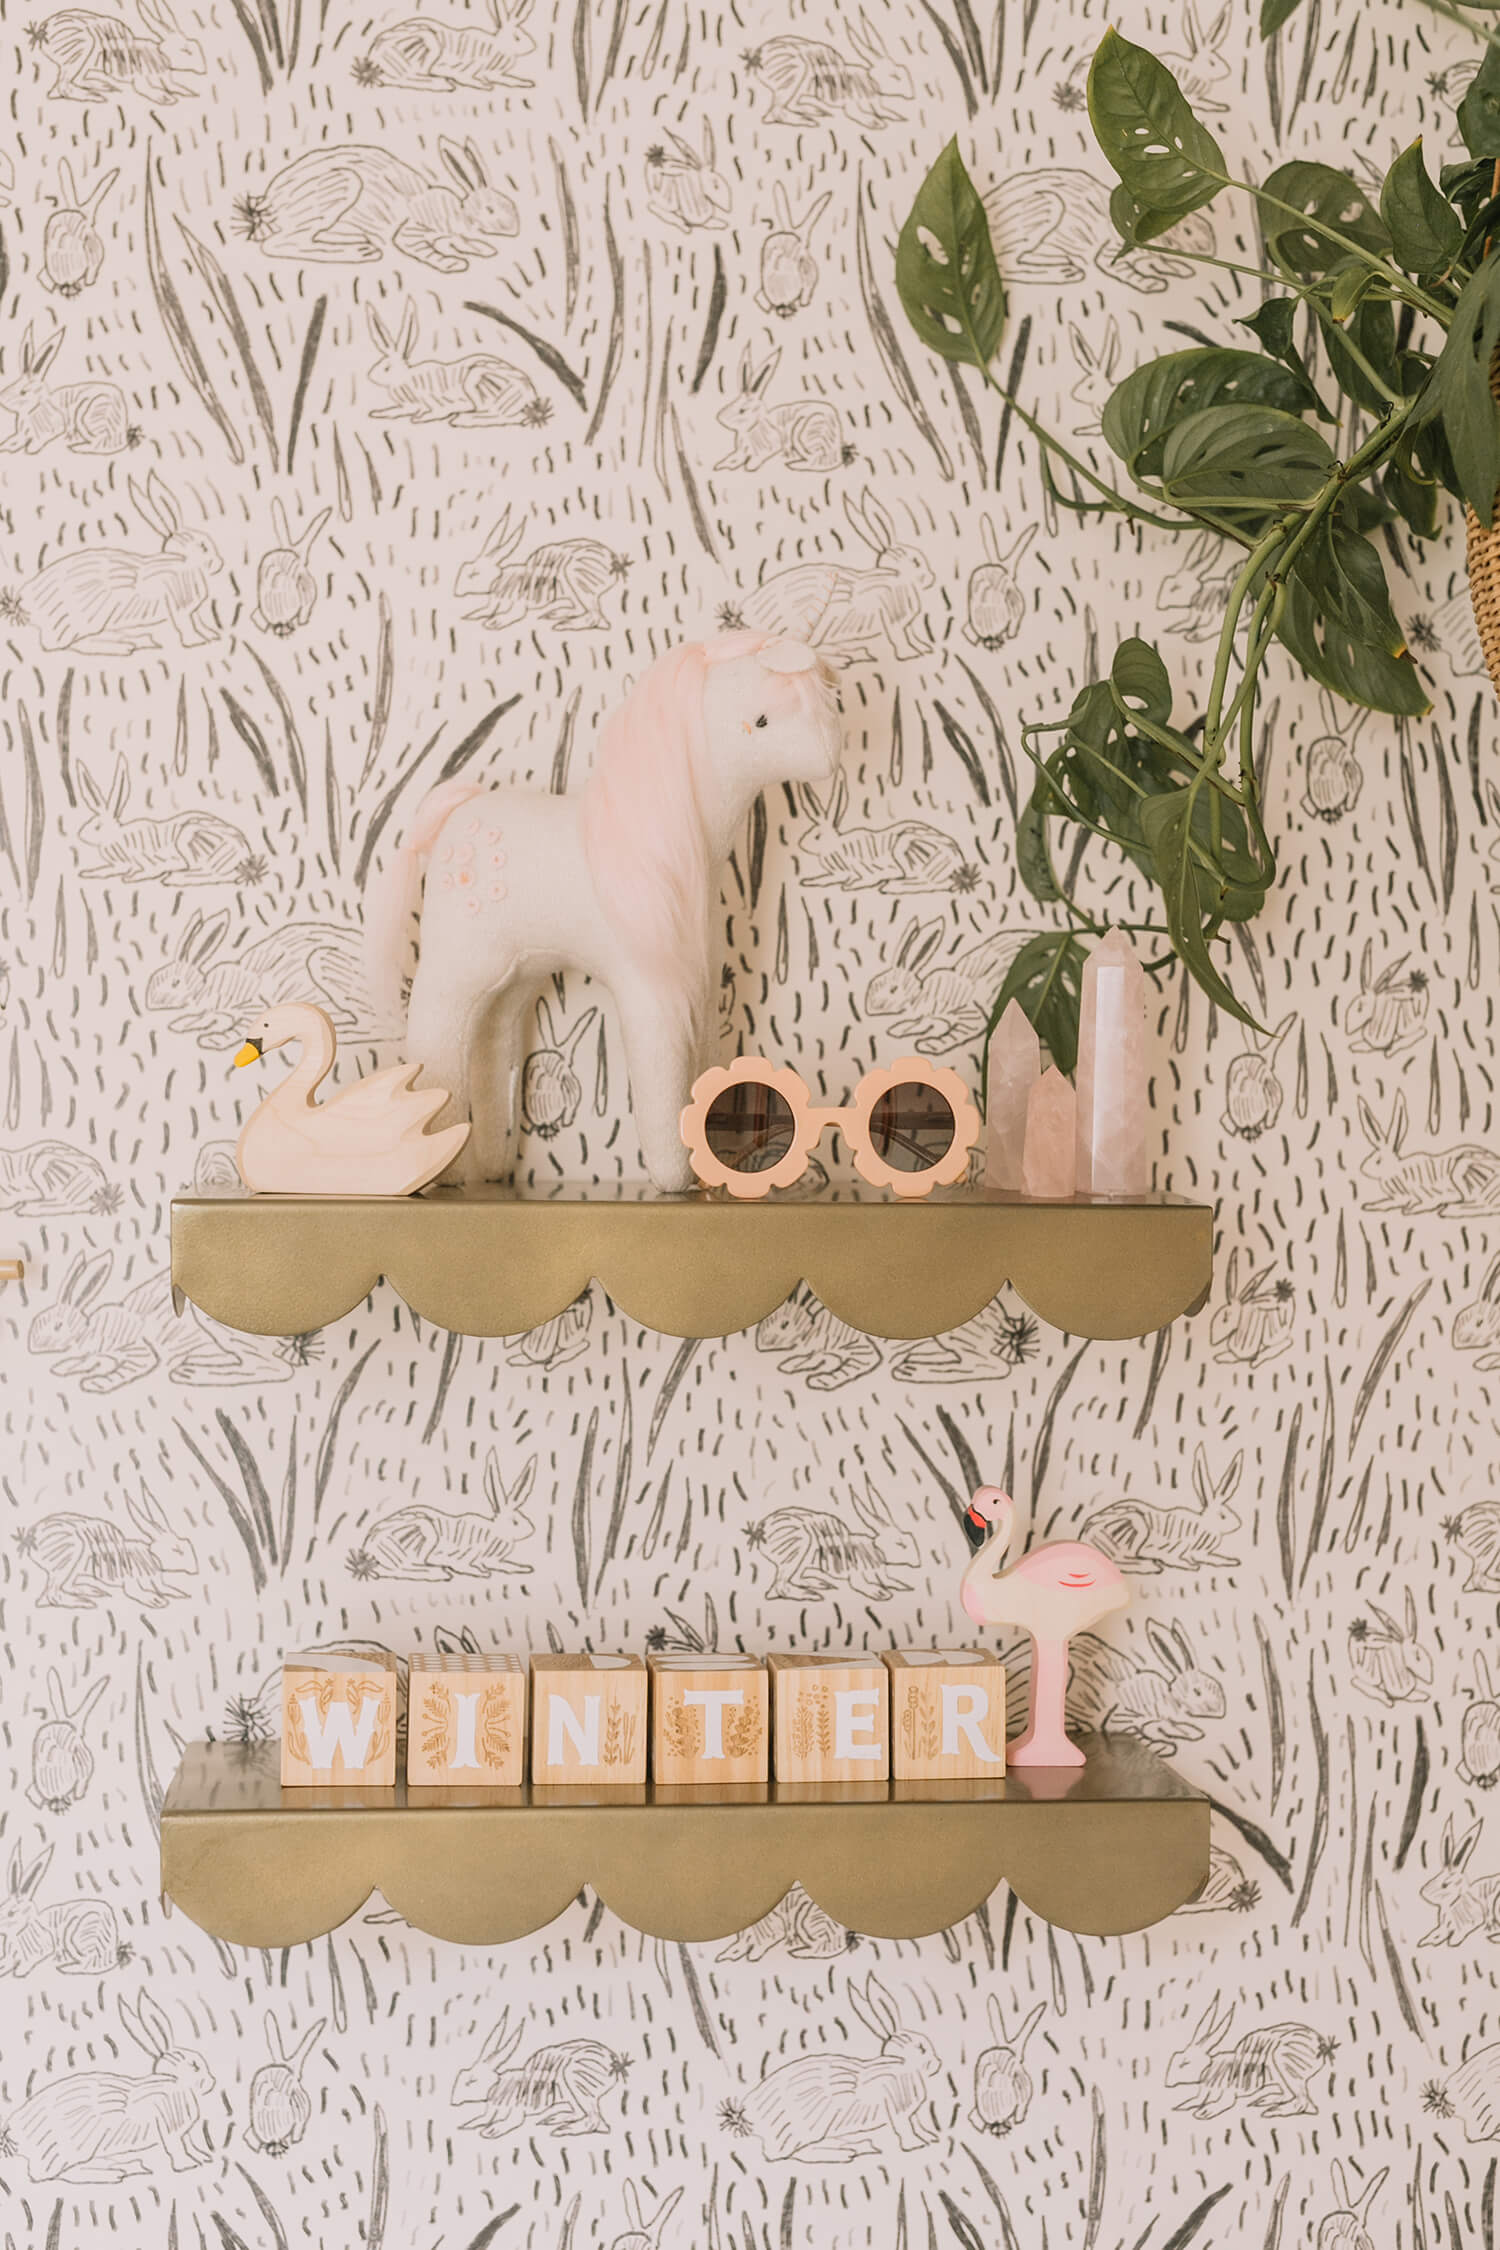 Whimsical wallpaper in a nursery by A Beautiful Mess